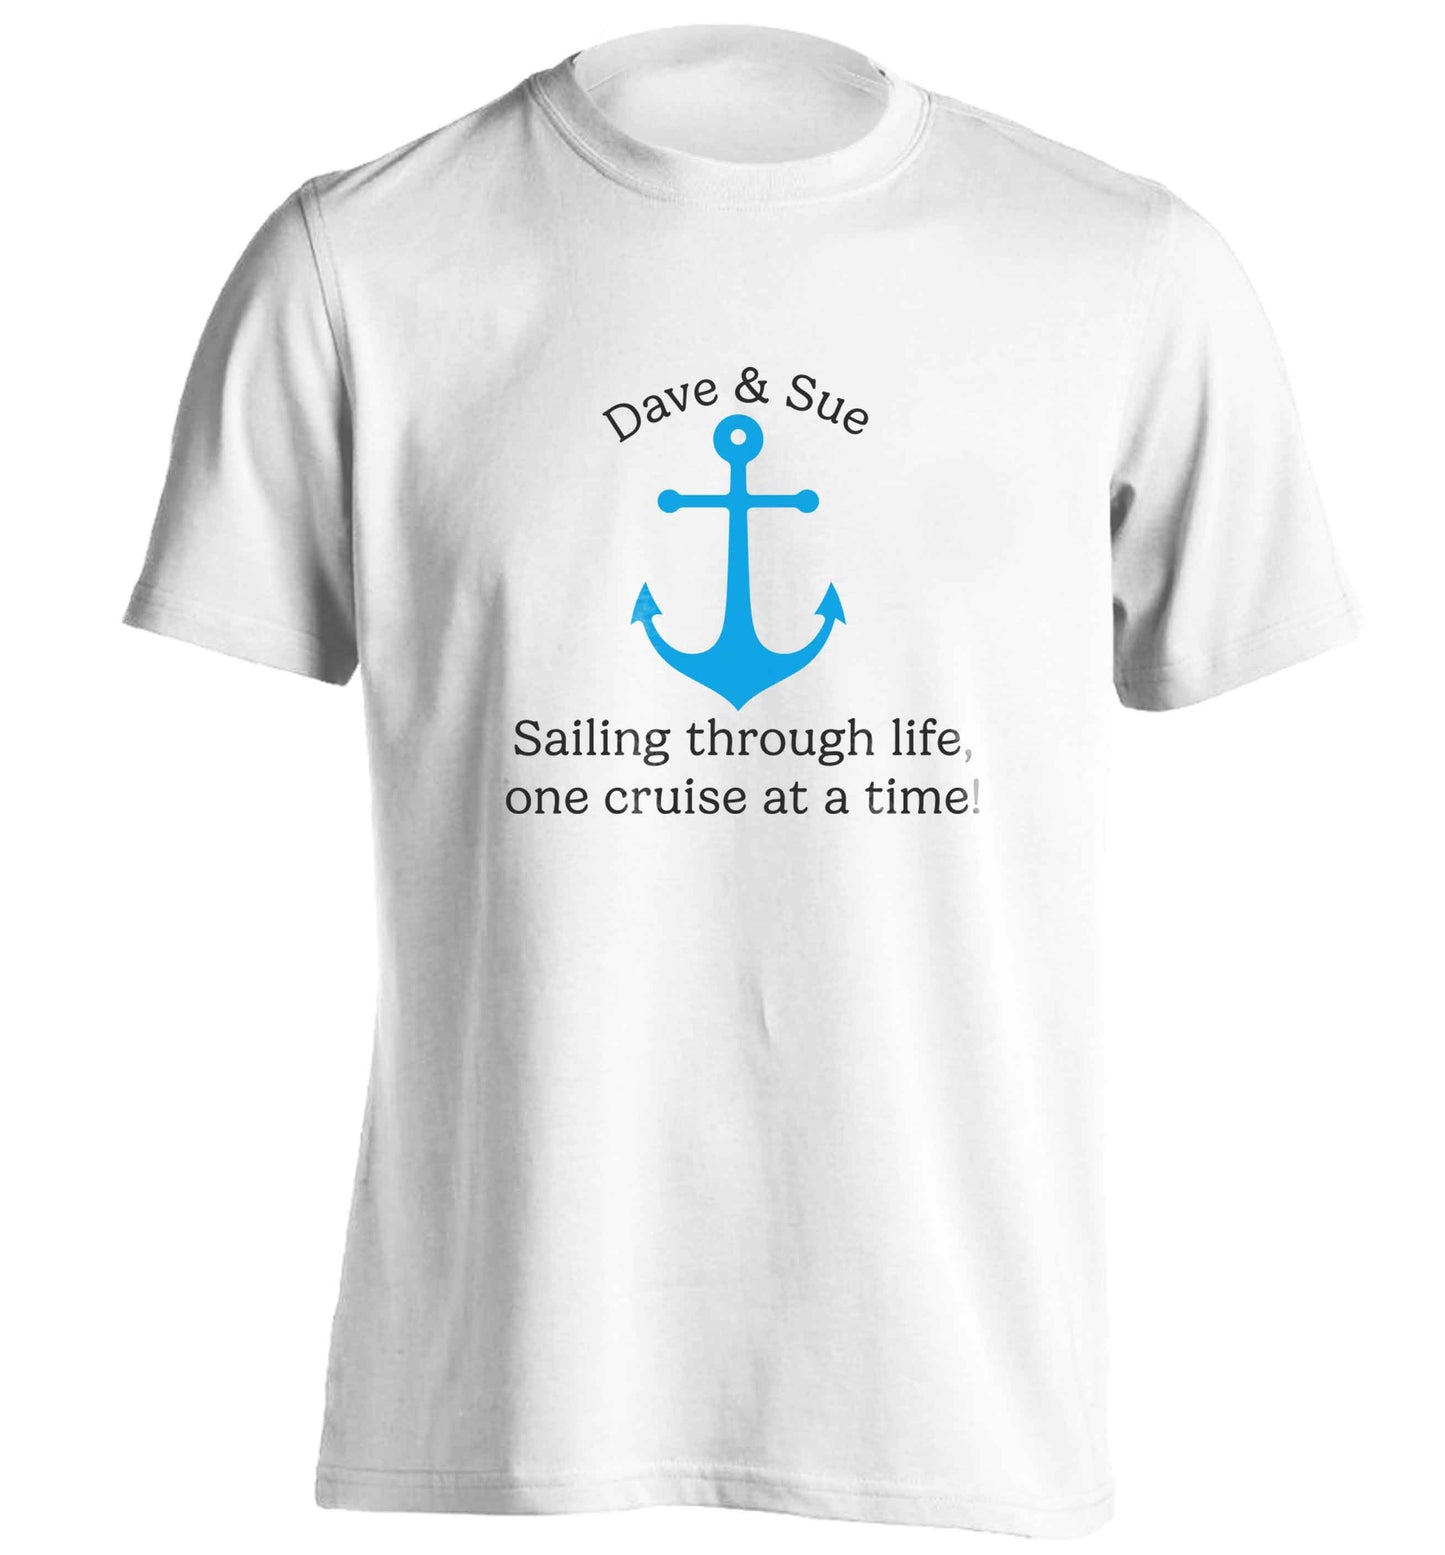 Sailing through life one cruise at a time - personalised adults unisex white Tshirt 2XL